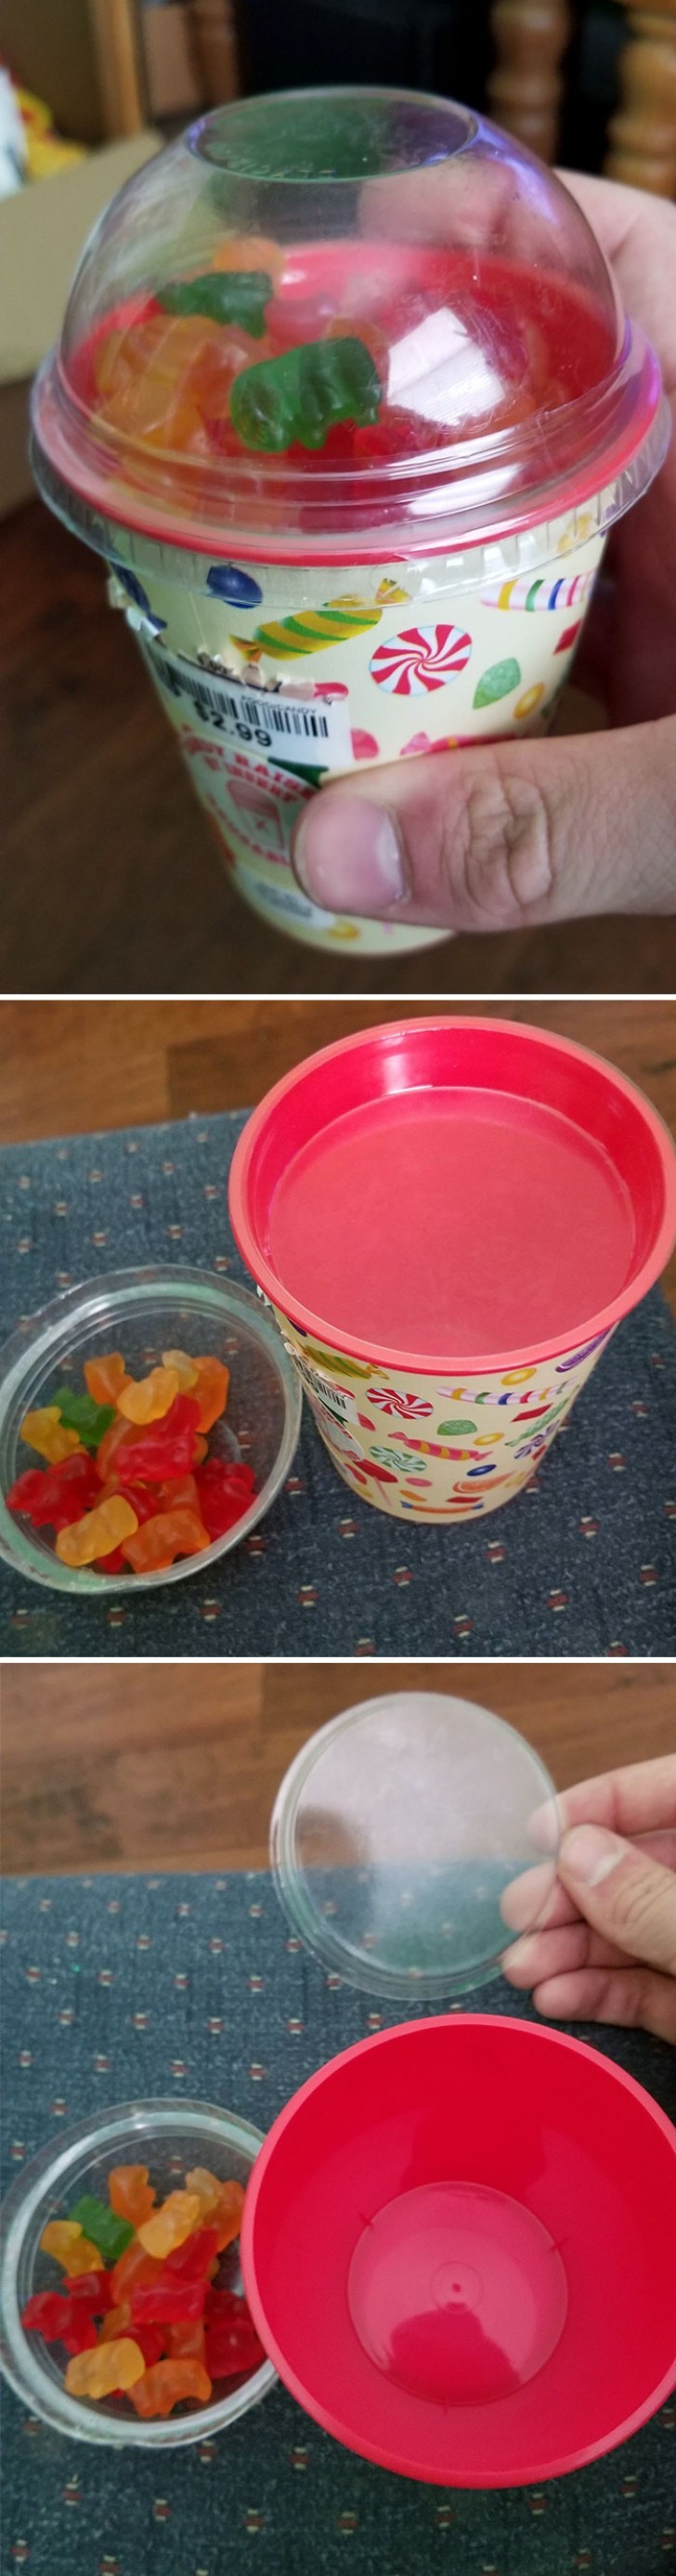 A plastic cup full of gummy bears ... or so the buyer thought!